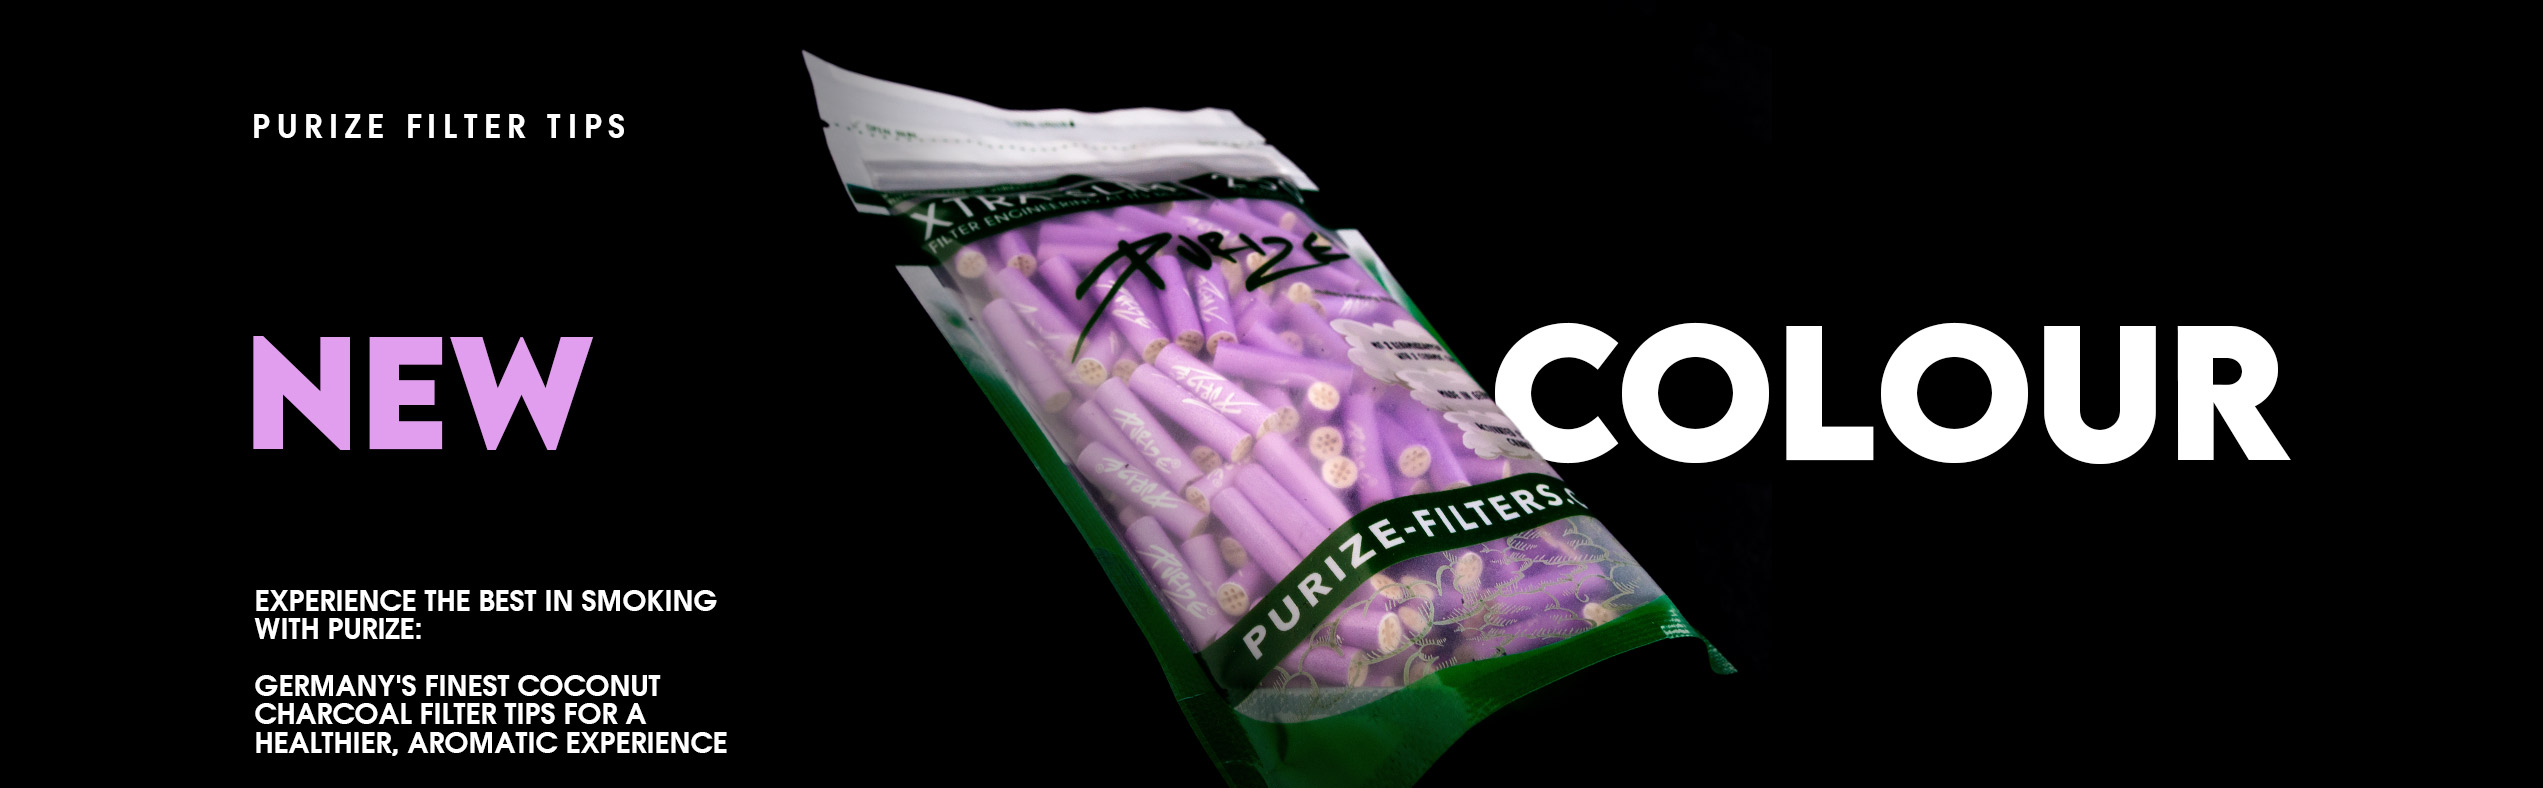 Purize Carbon Filter Tips Lilac Colorway